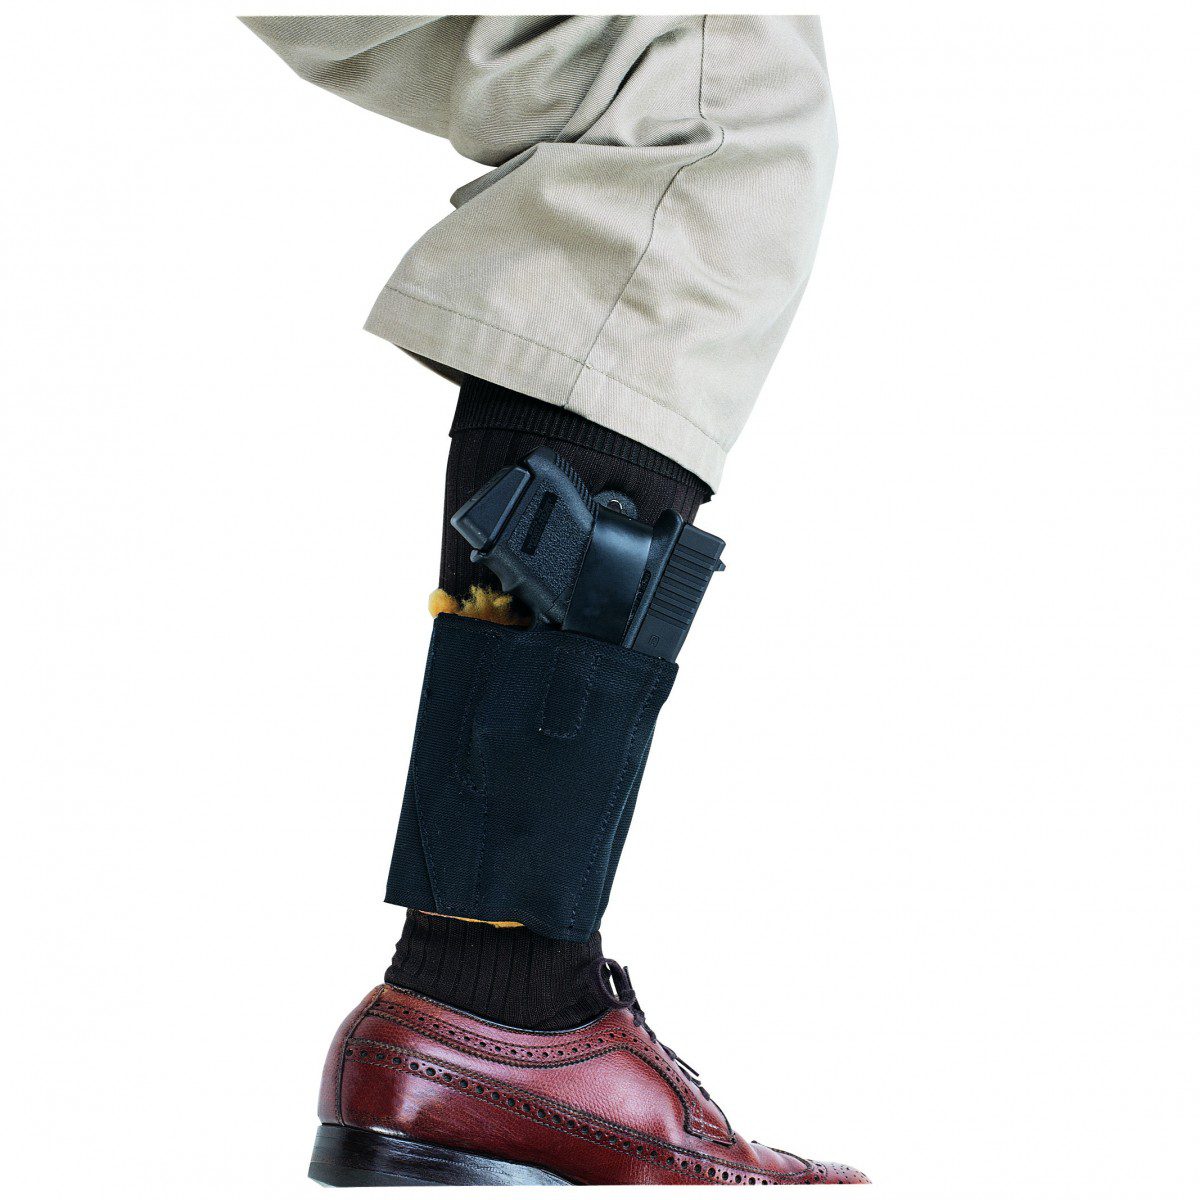 Aker Leather Comfort-Flex® PRO Ankle Holster 157 - Ankle Holsters